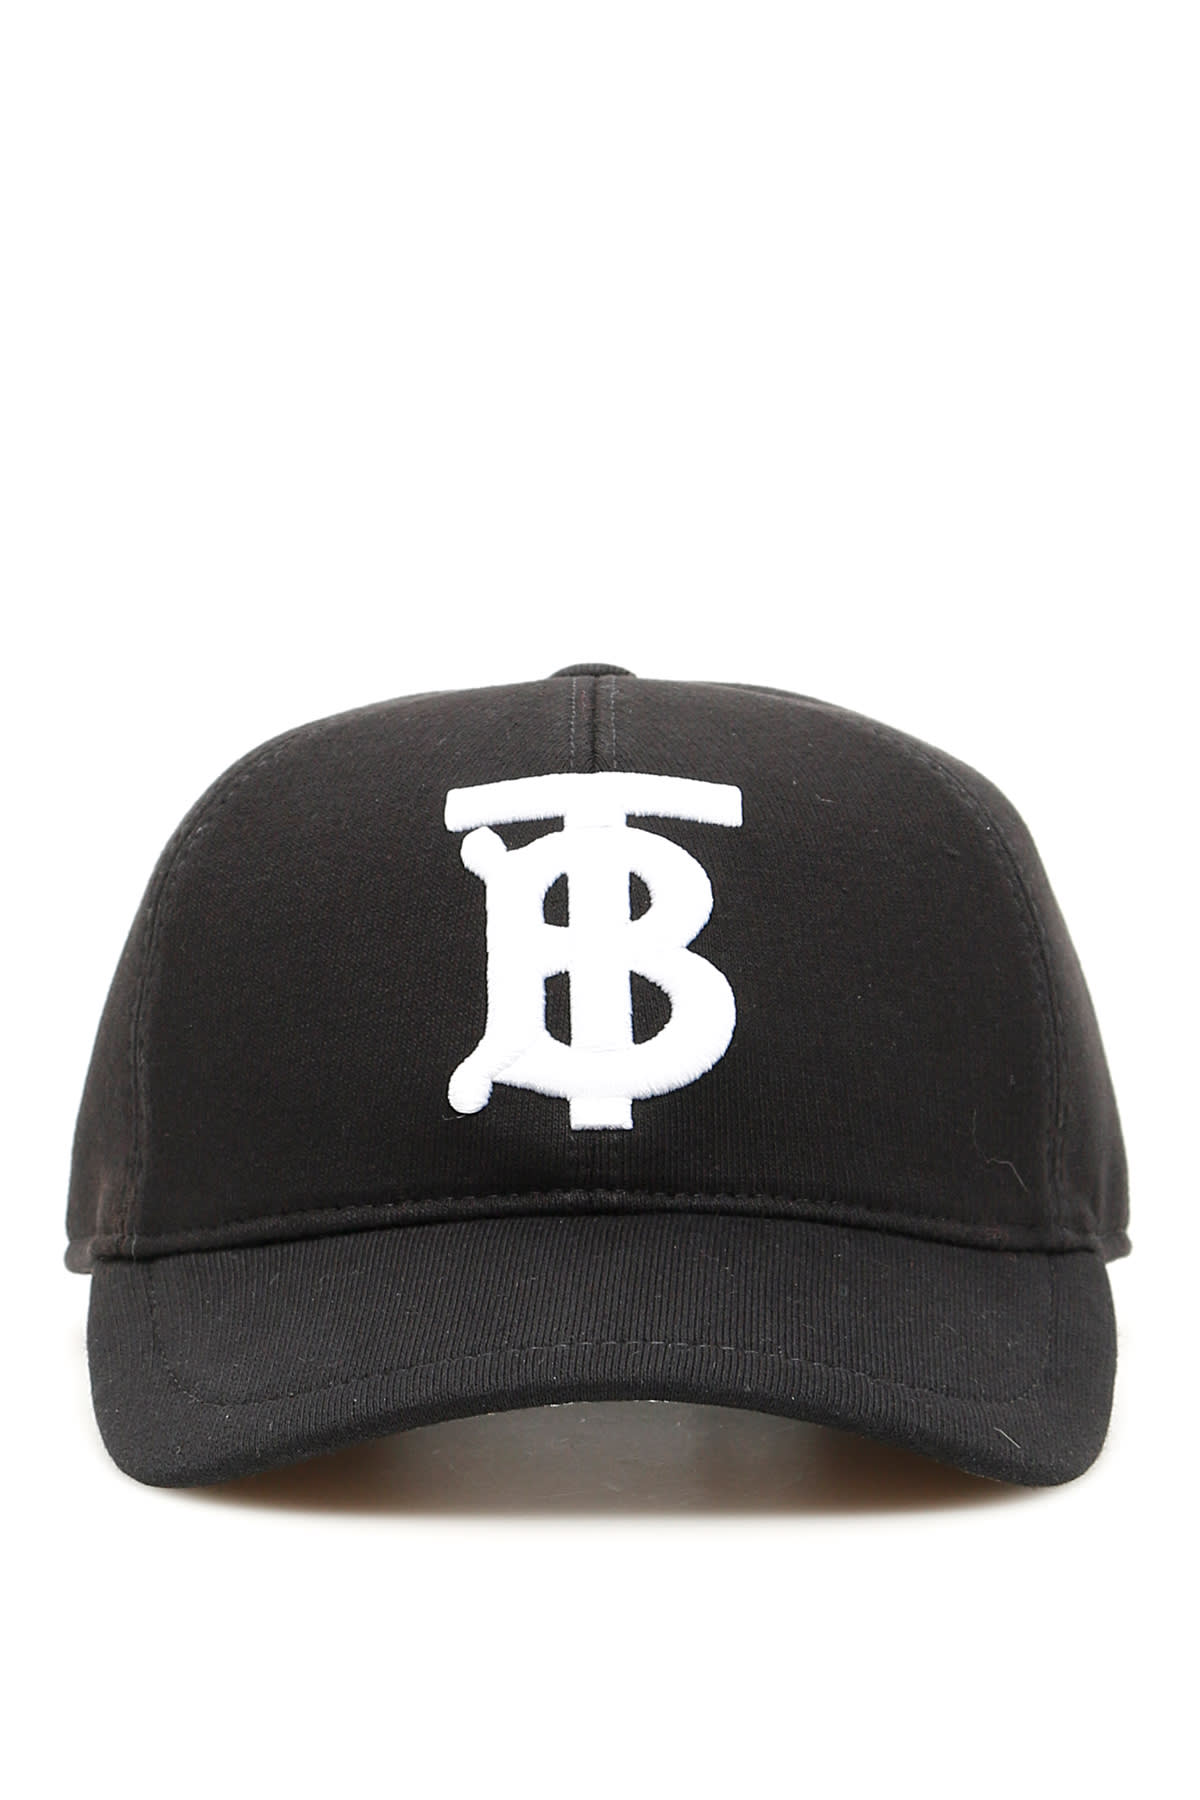 Burberry Jersey And Check Baseball Cap In Black (black)